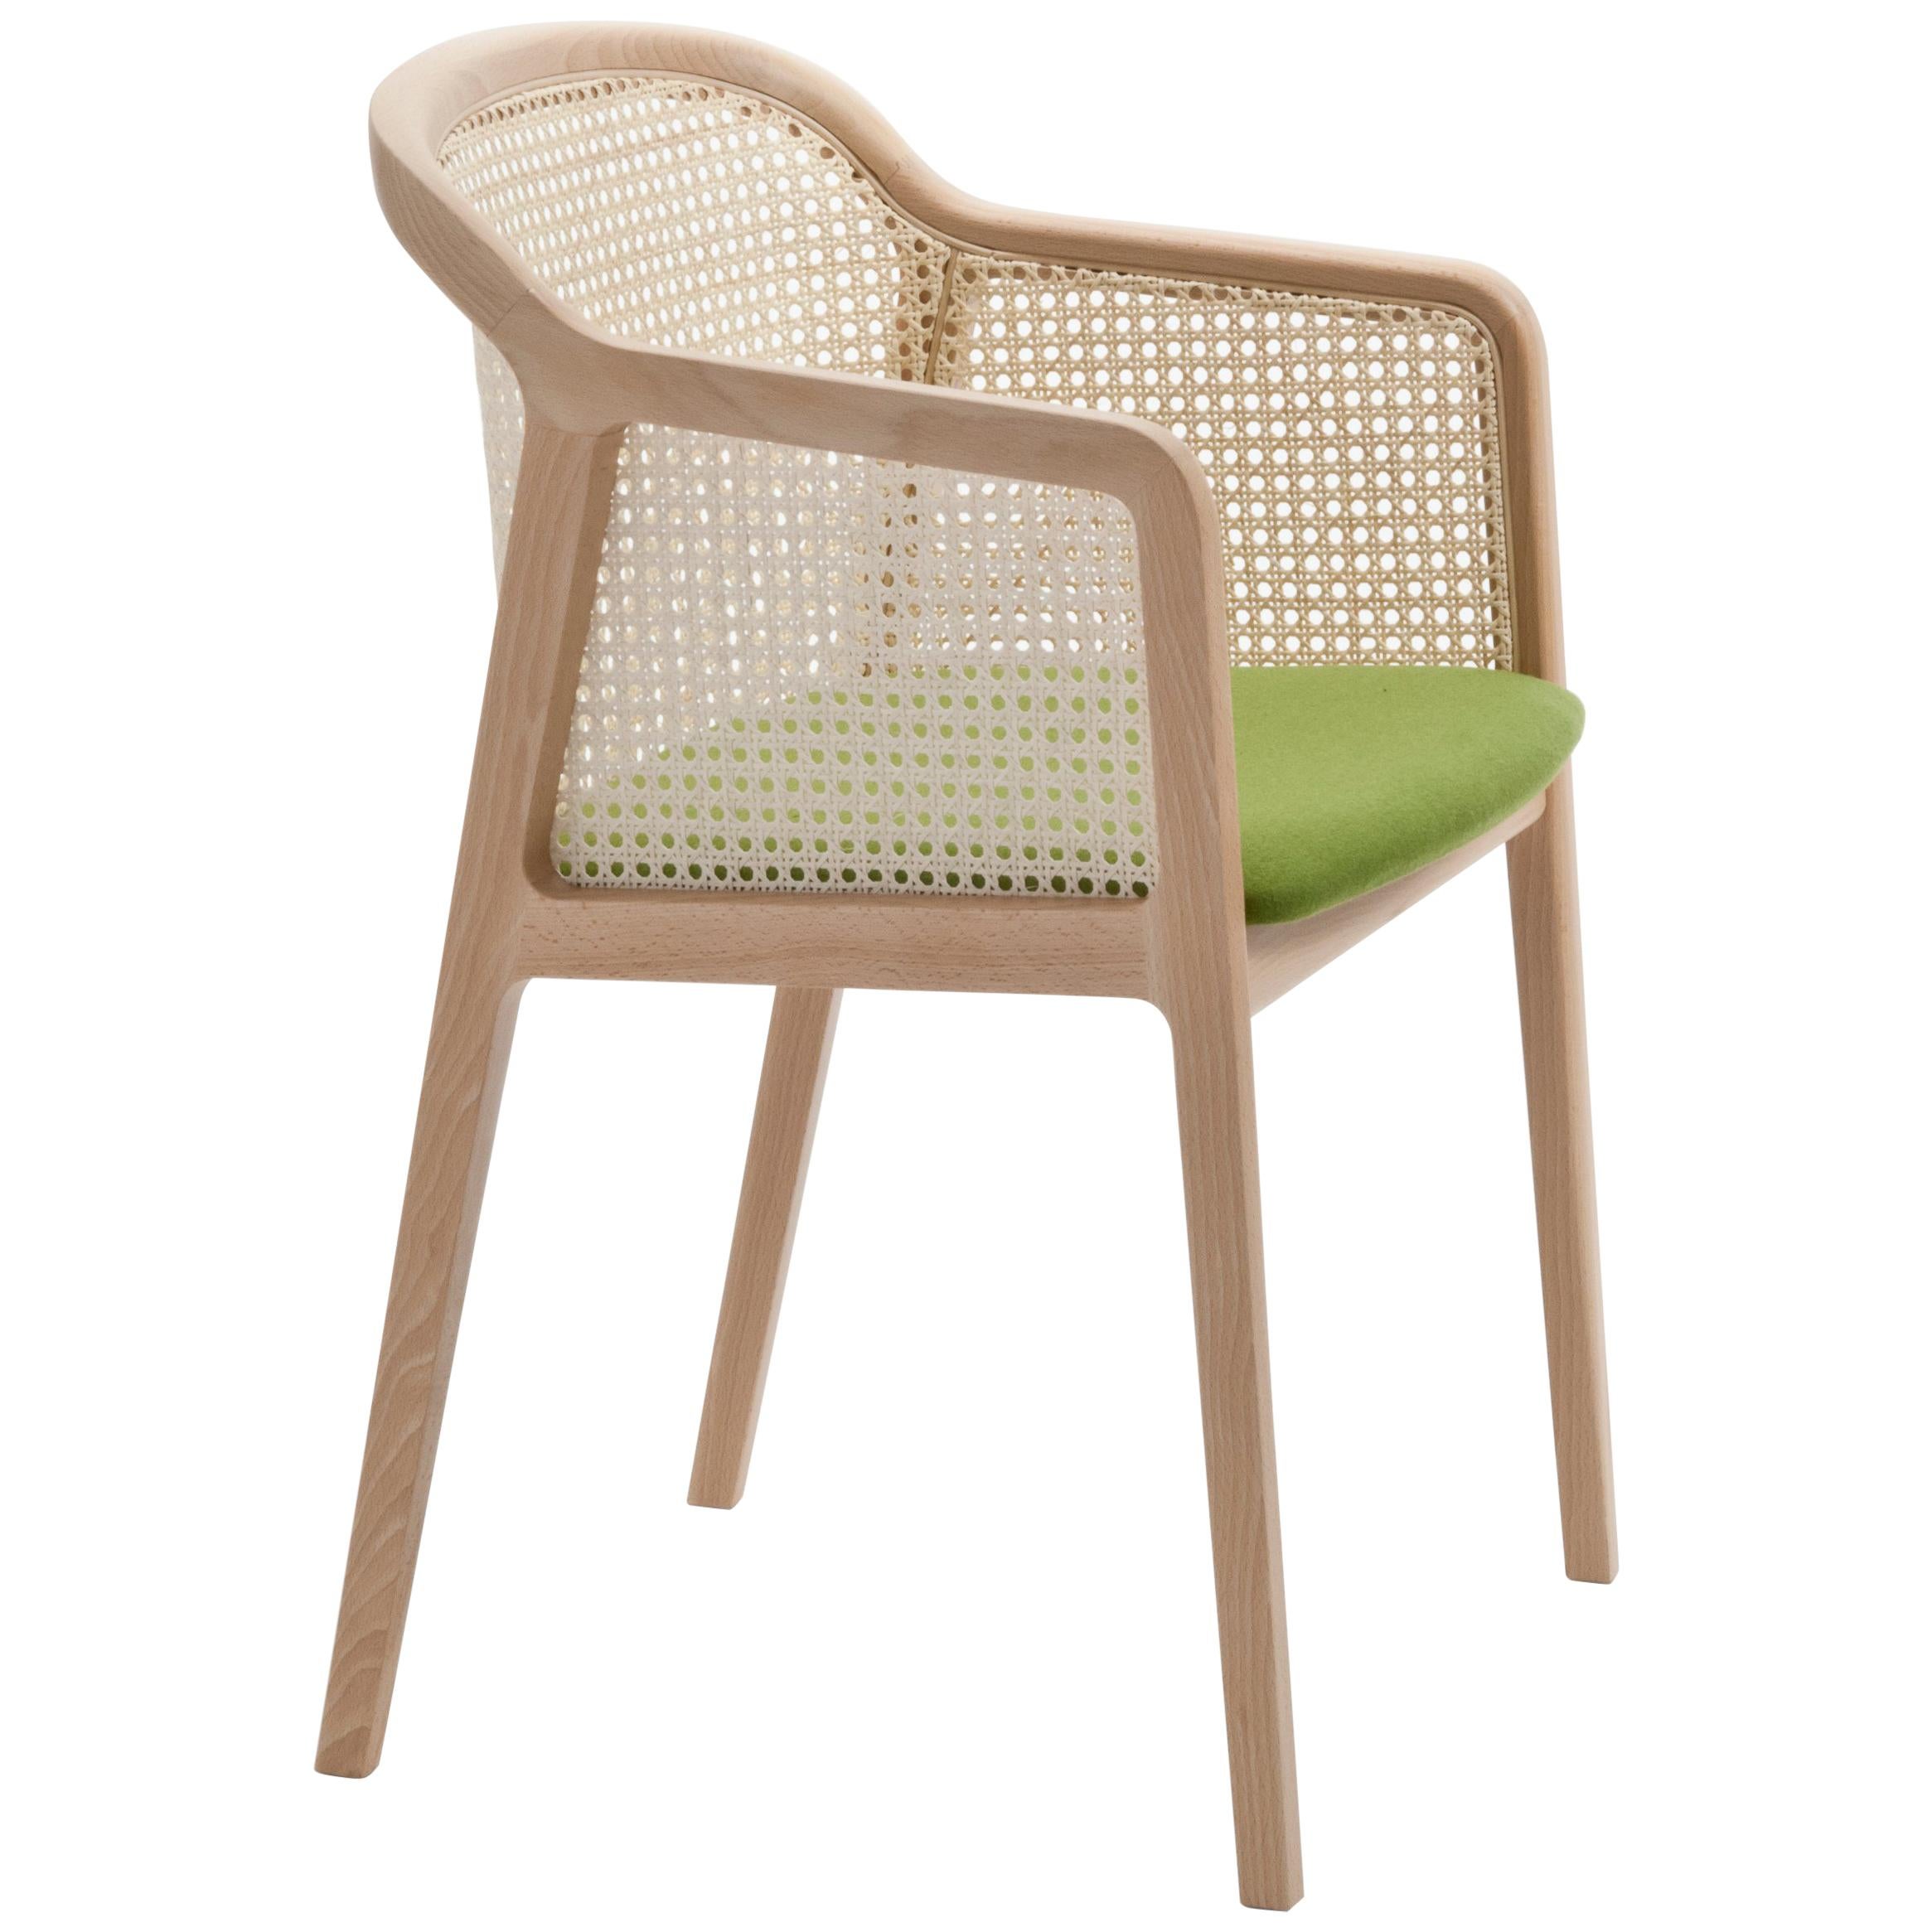 Vienna Armchair by Colé, Modernity Design in Wood and Straw, Green Upholstered Seat en vente